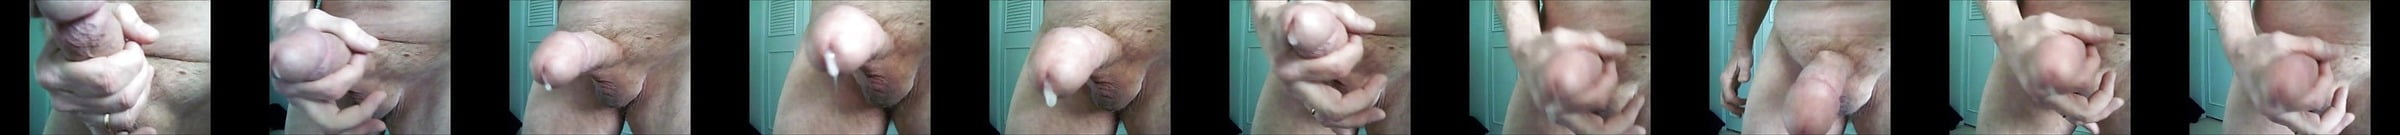 Male Orgasm Anal And Perineum Contractions Gay Porn 56 Xhamster